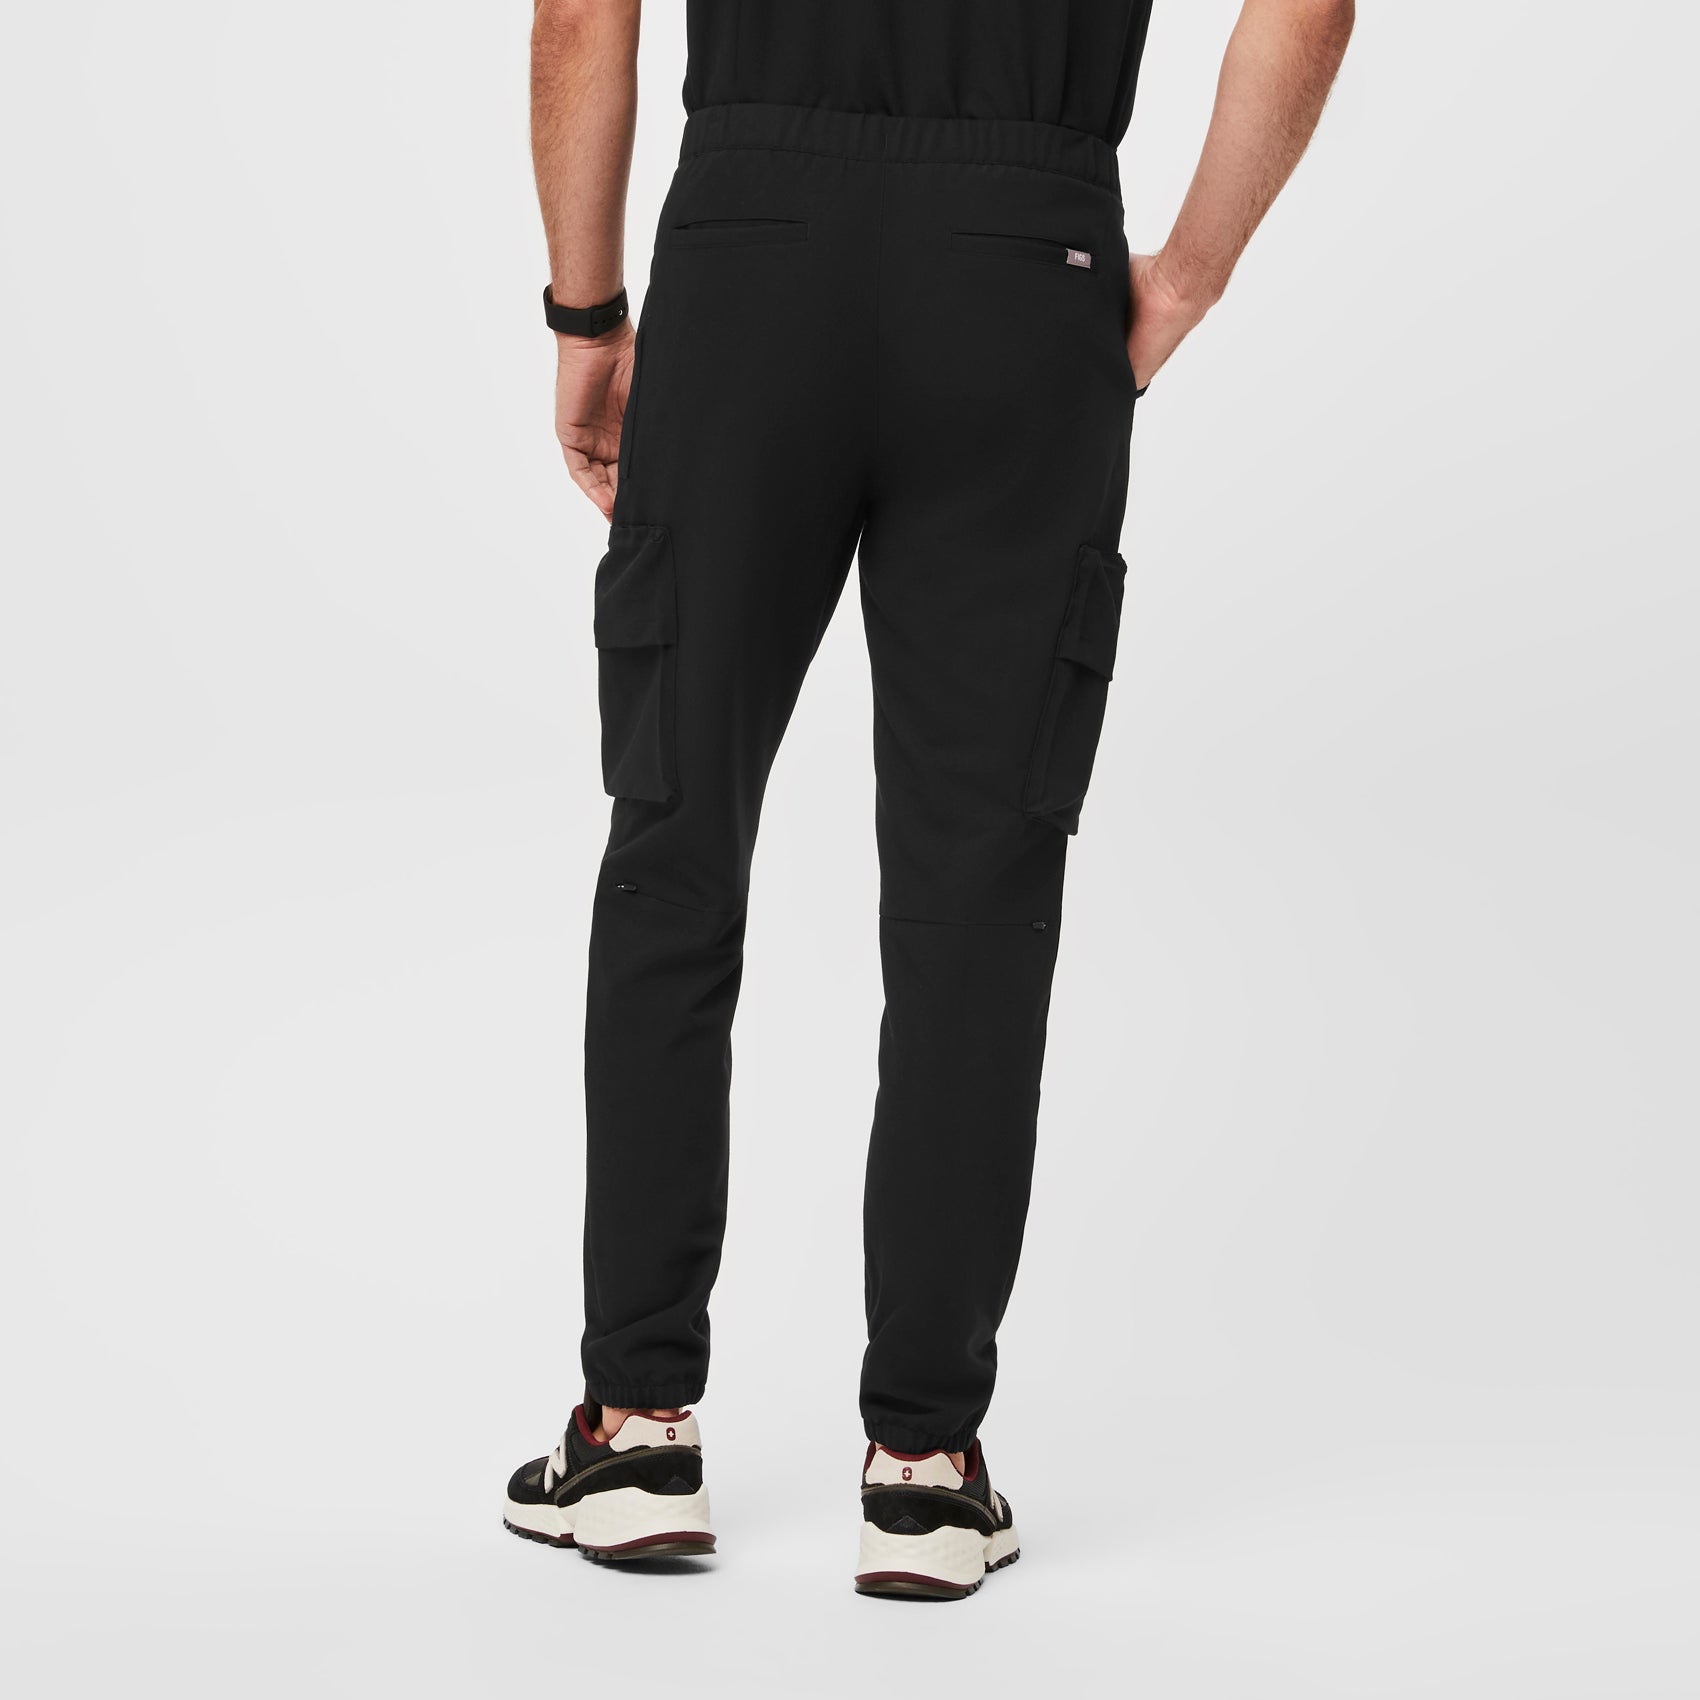 Black Pants With Pockets